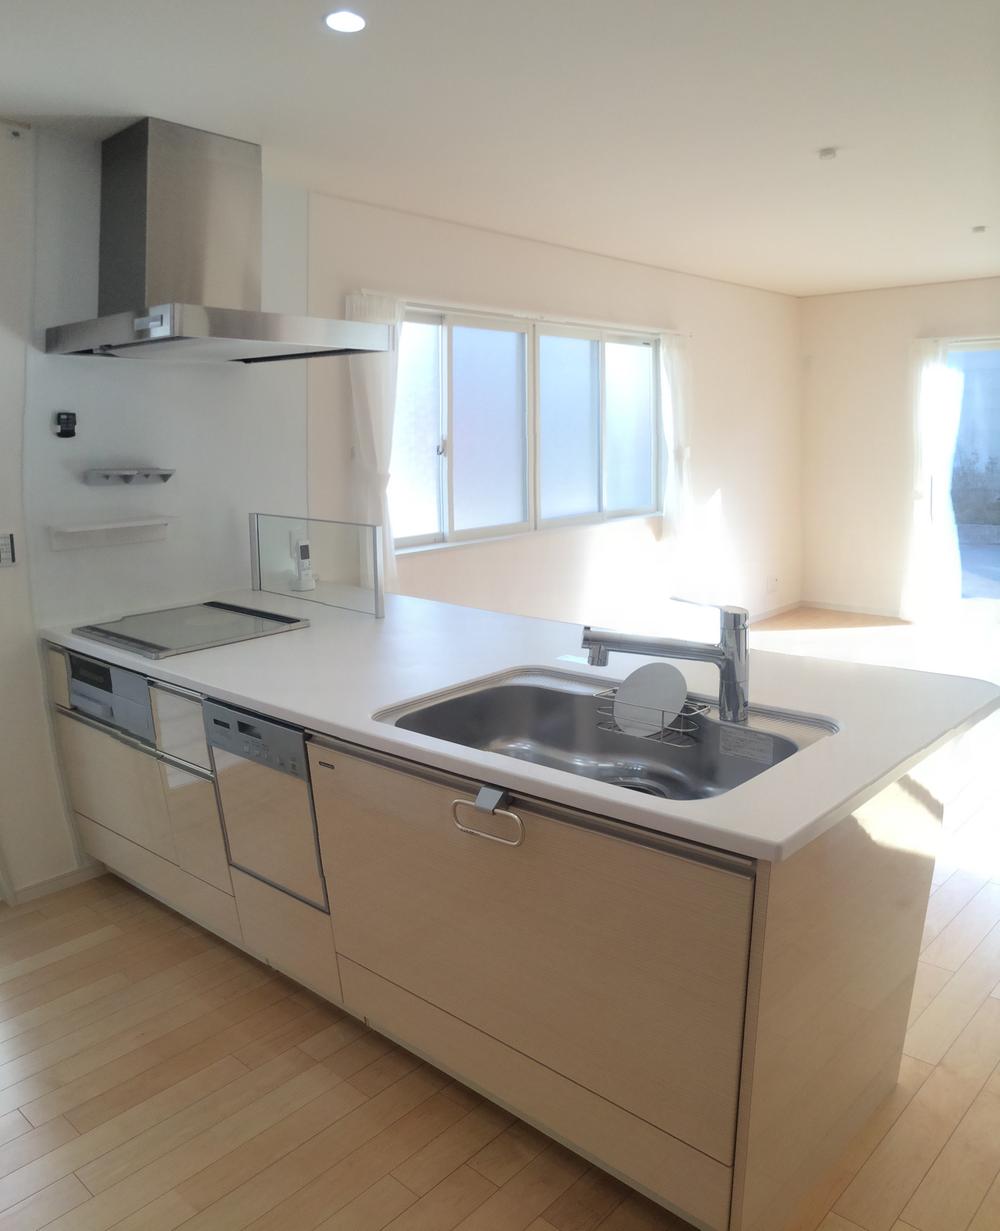 Kitchen.  [11-15]  Open preeminent full open kitchen overlooks to living. IH cooking heater, With dishwasher